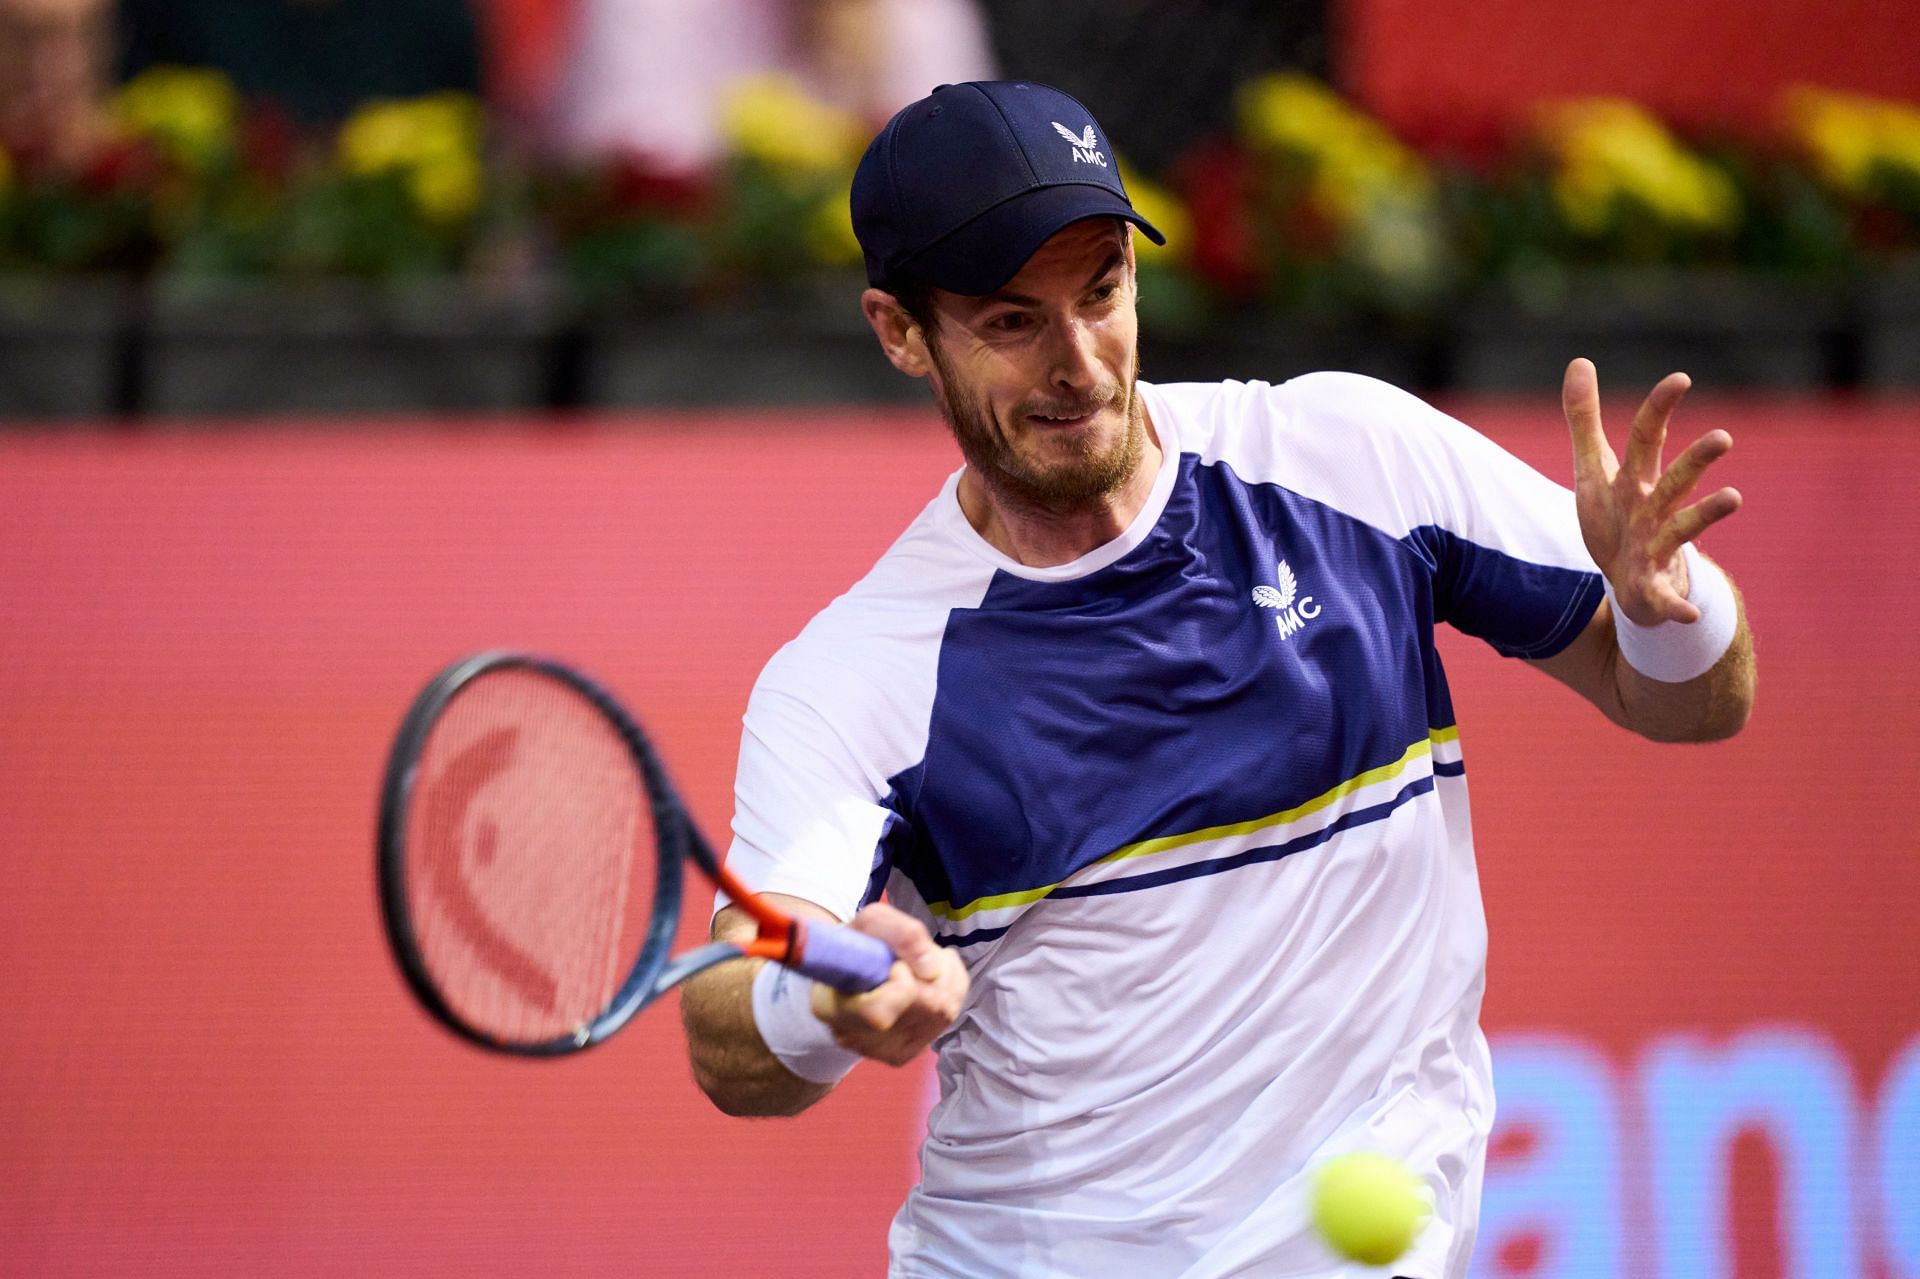 Andy Murray will look to start the European Open strongly